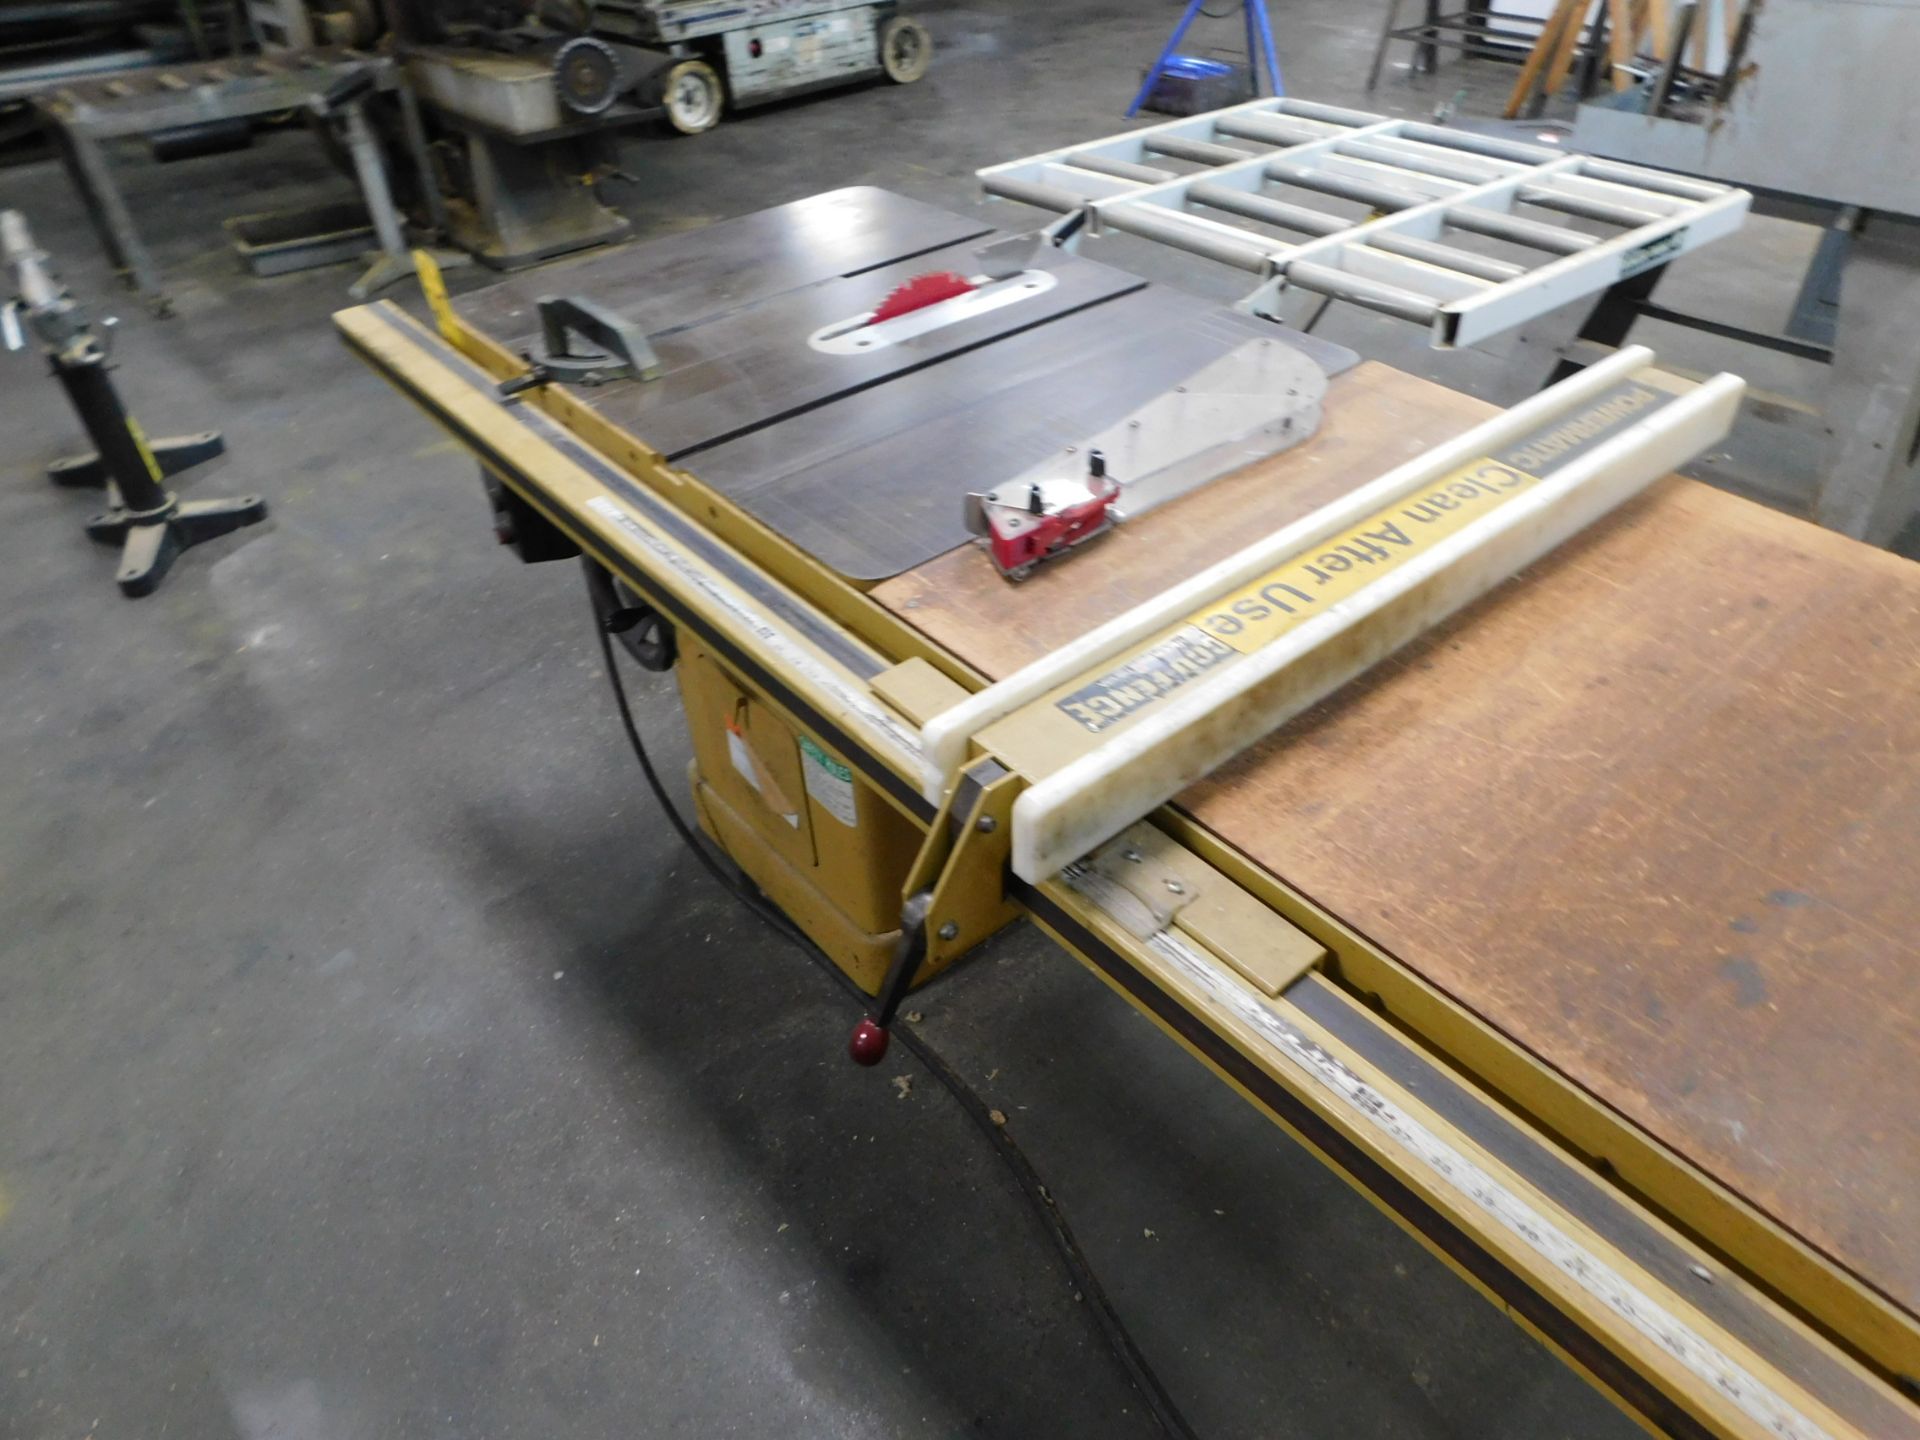 Powermatic Model 66, 10" Table Saw, s/n 93662581, with Fence and Miter Gauge, Loading Fee $100.00 - Image 3 of 6